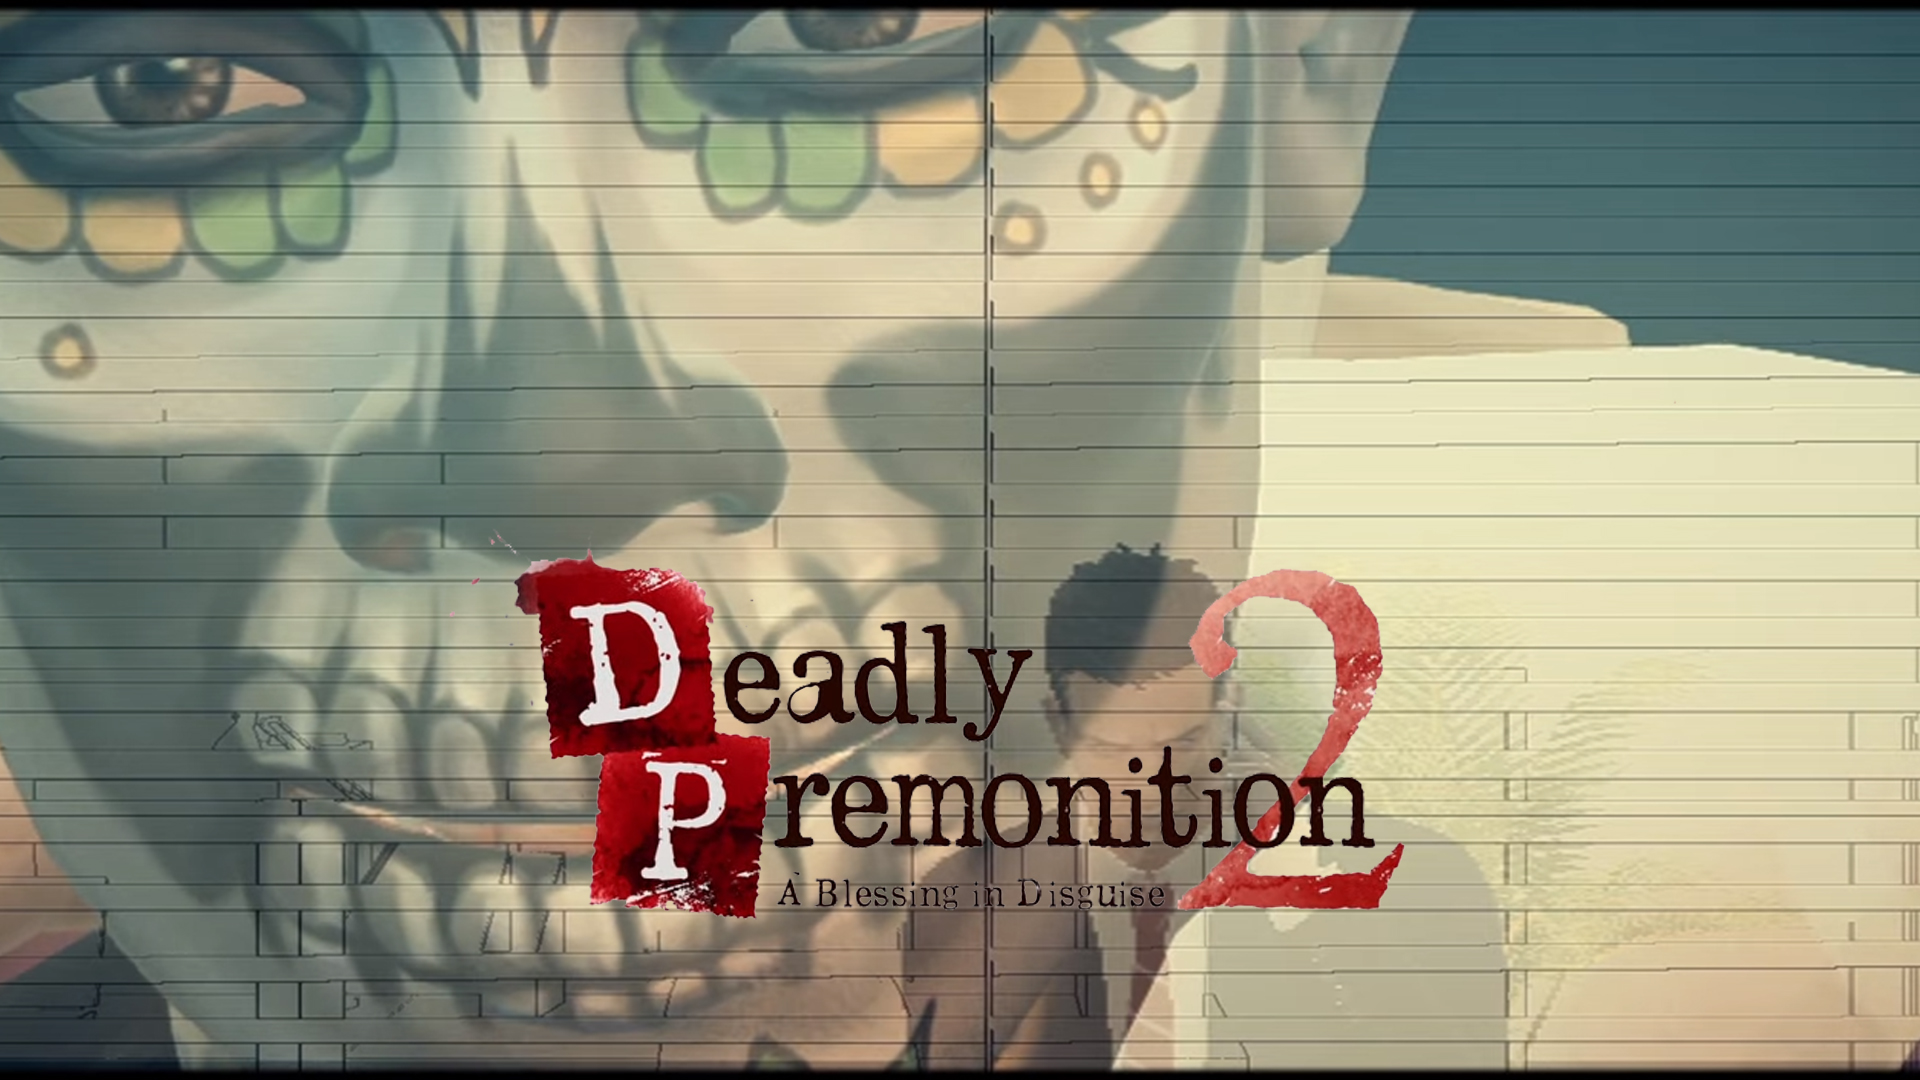 deadly premonition 2 ps5 download free